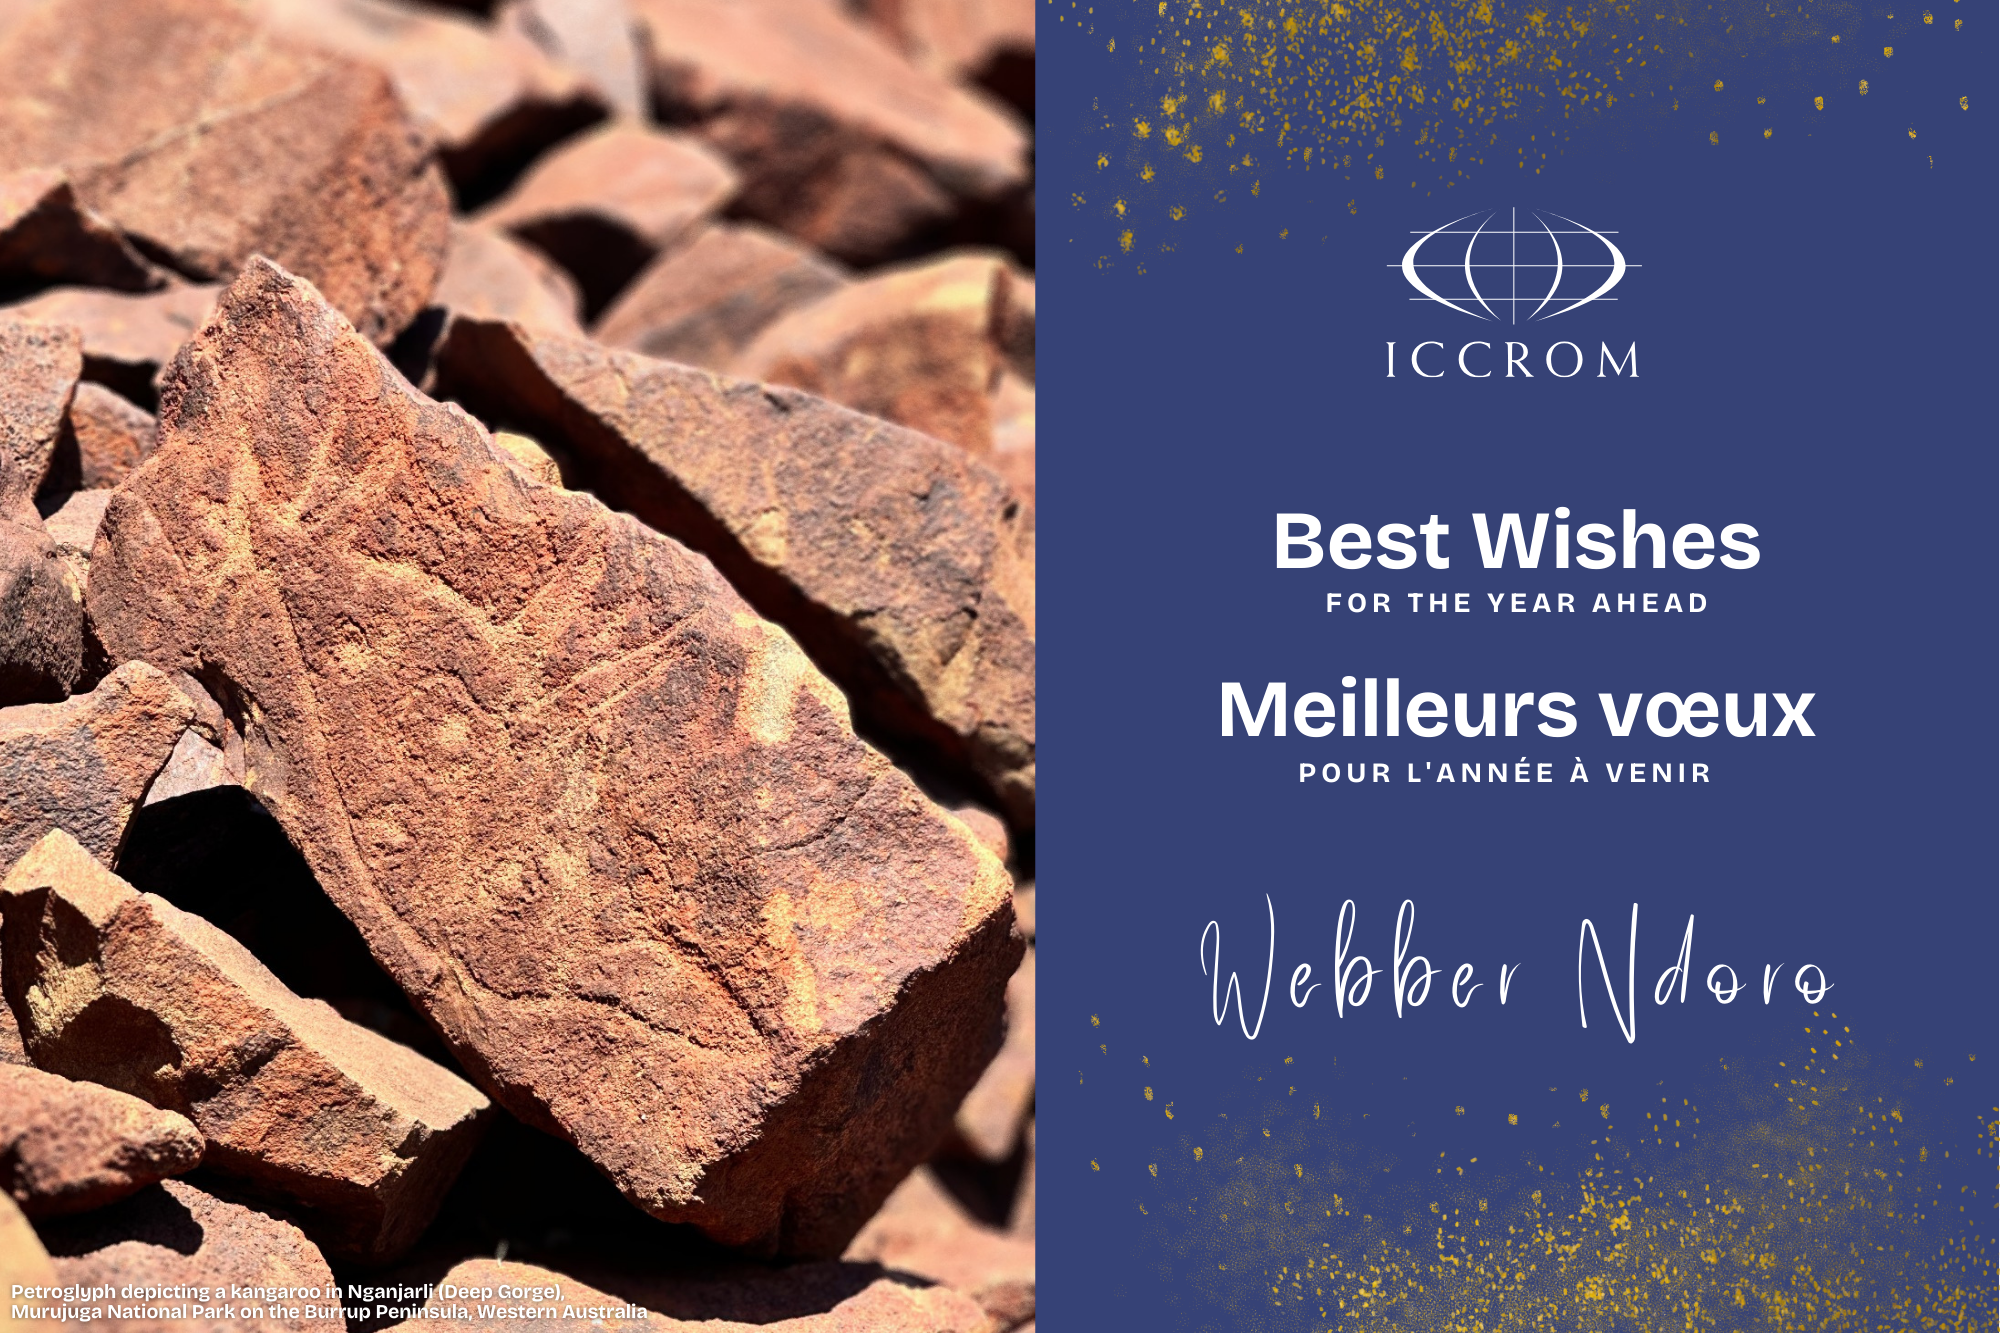 Best wishes from Webber Ndoro, ICCROM Director-General